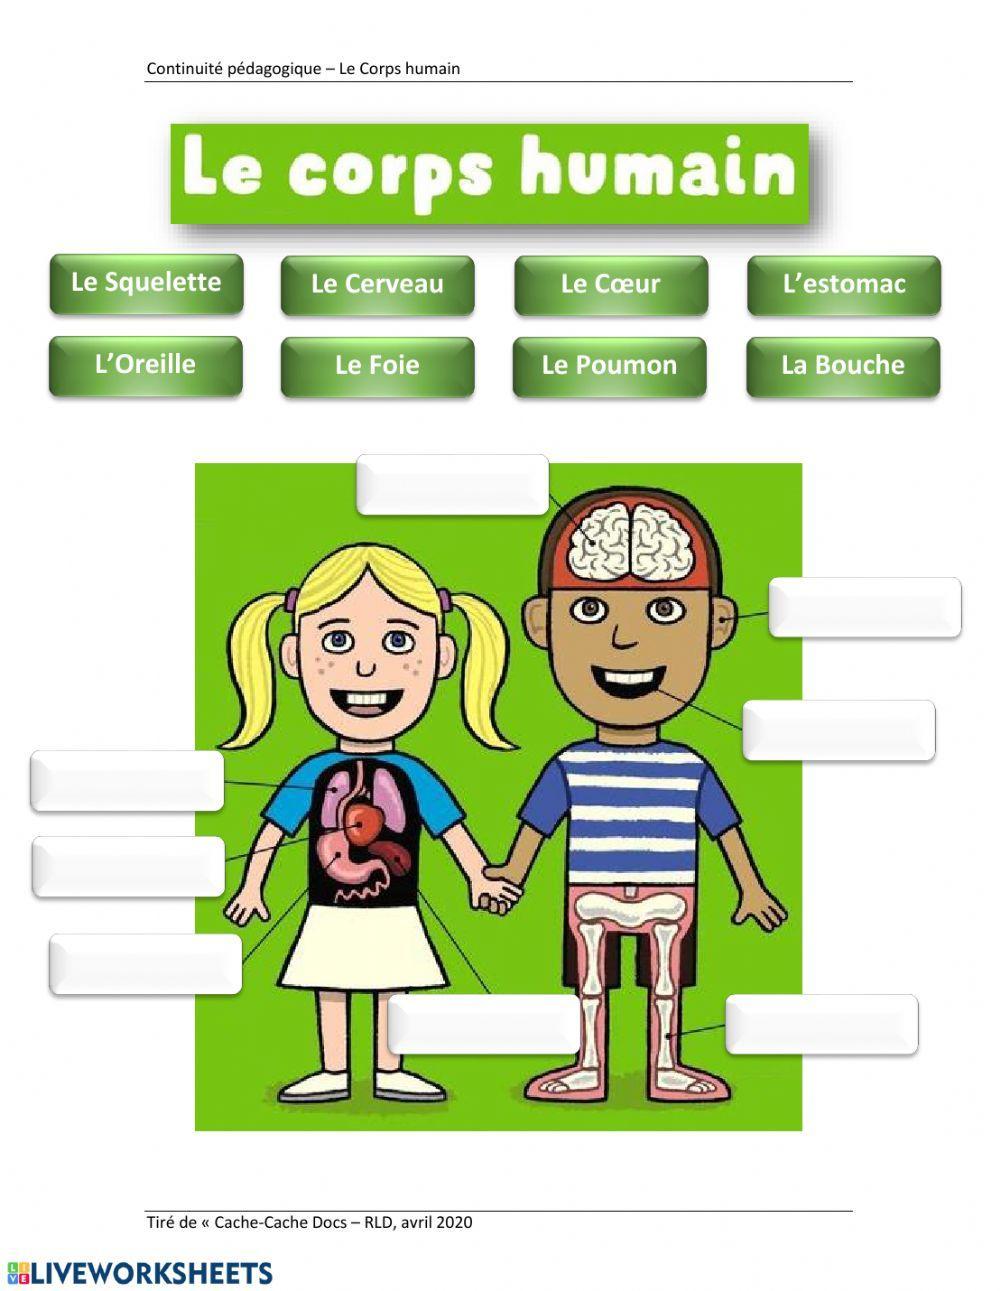 Le Corps Humain Ver 2